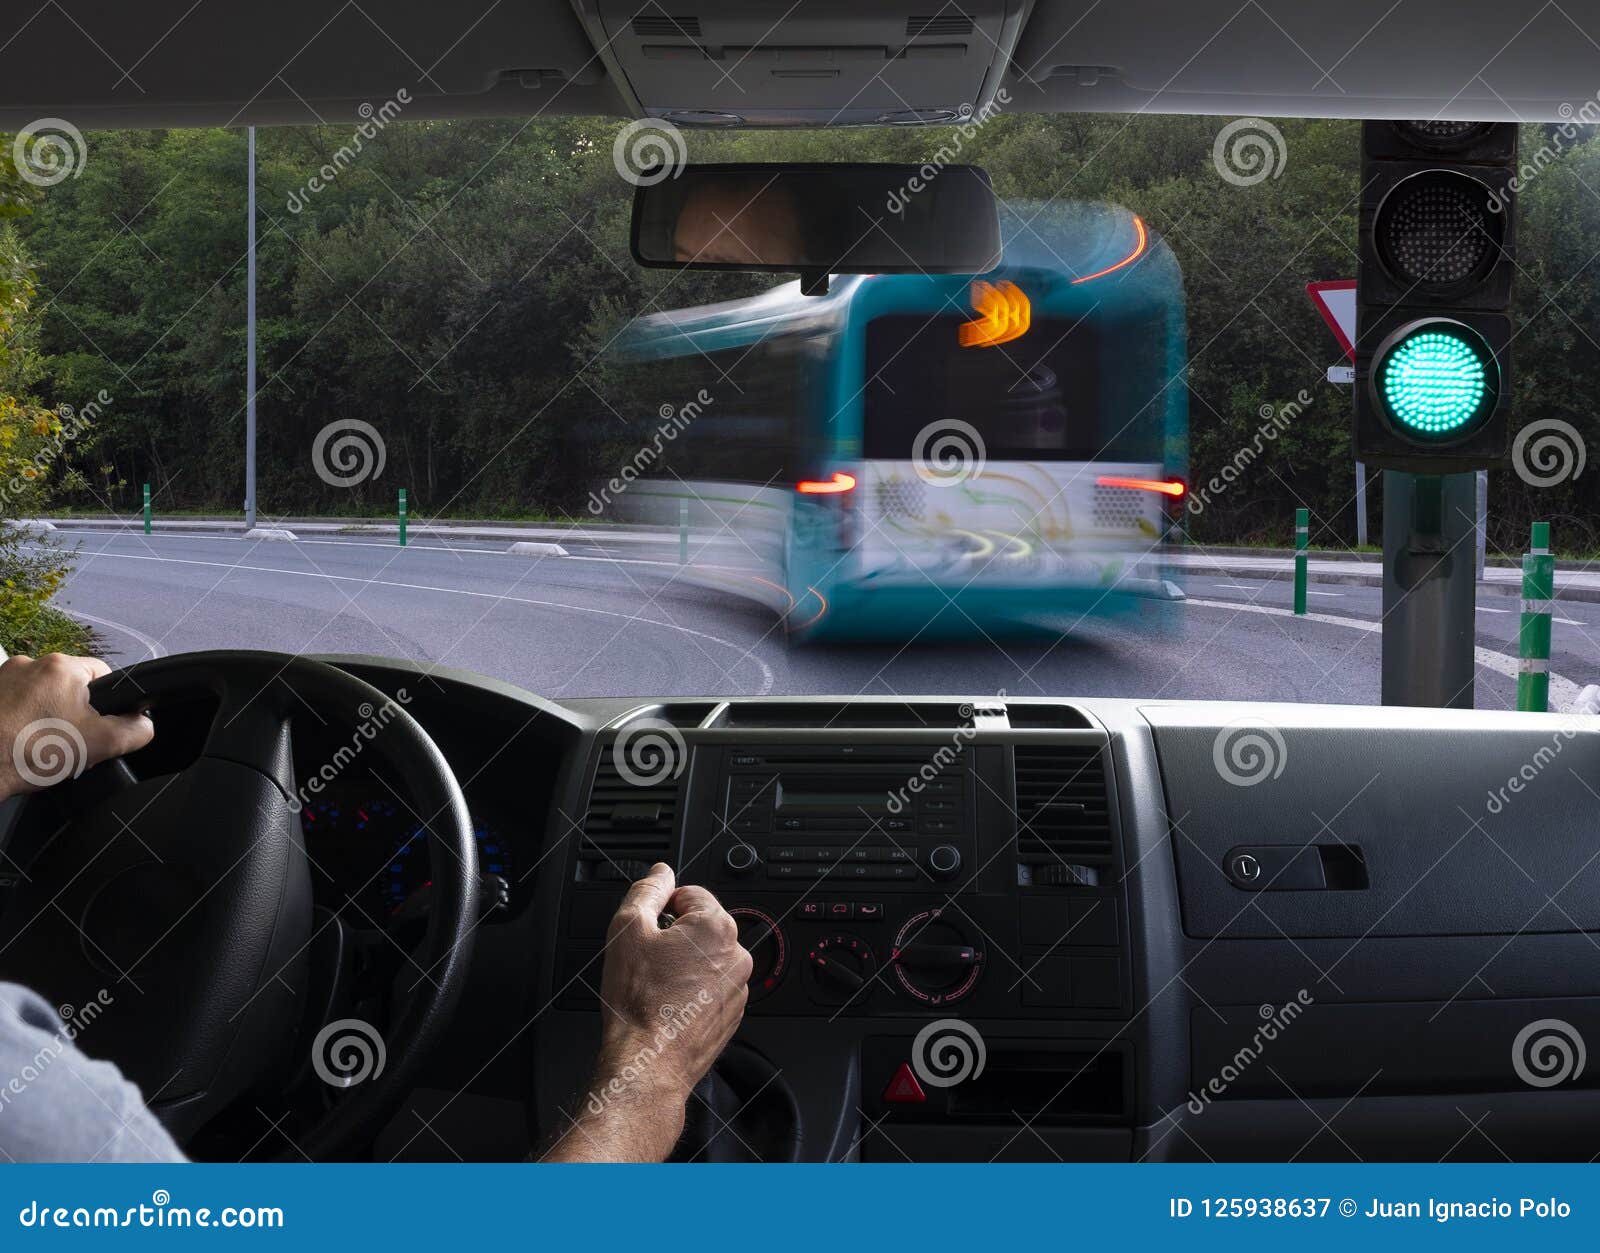 Inside Car View Of A Green Traffic Light Stock Image Image